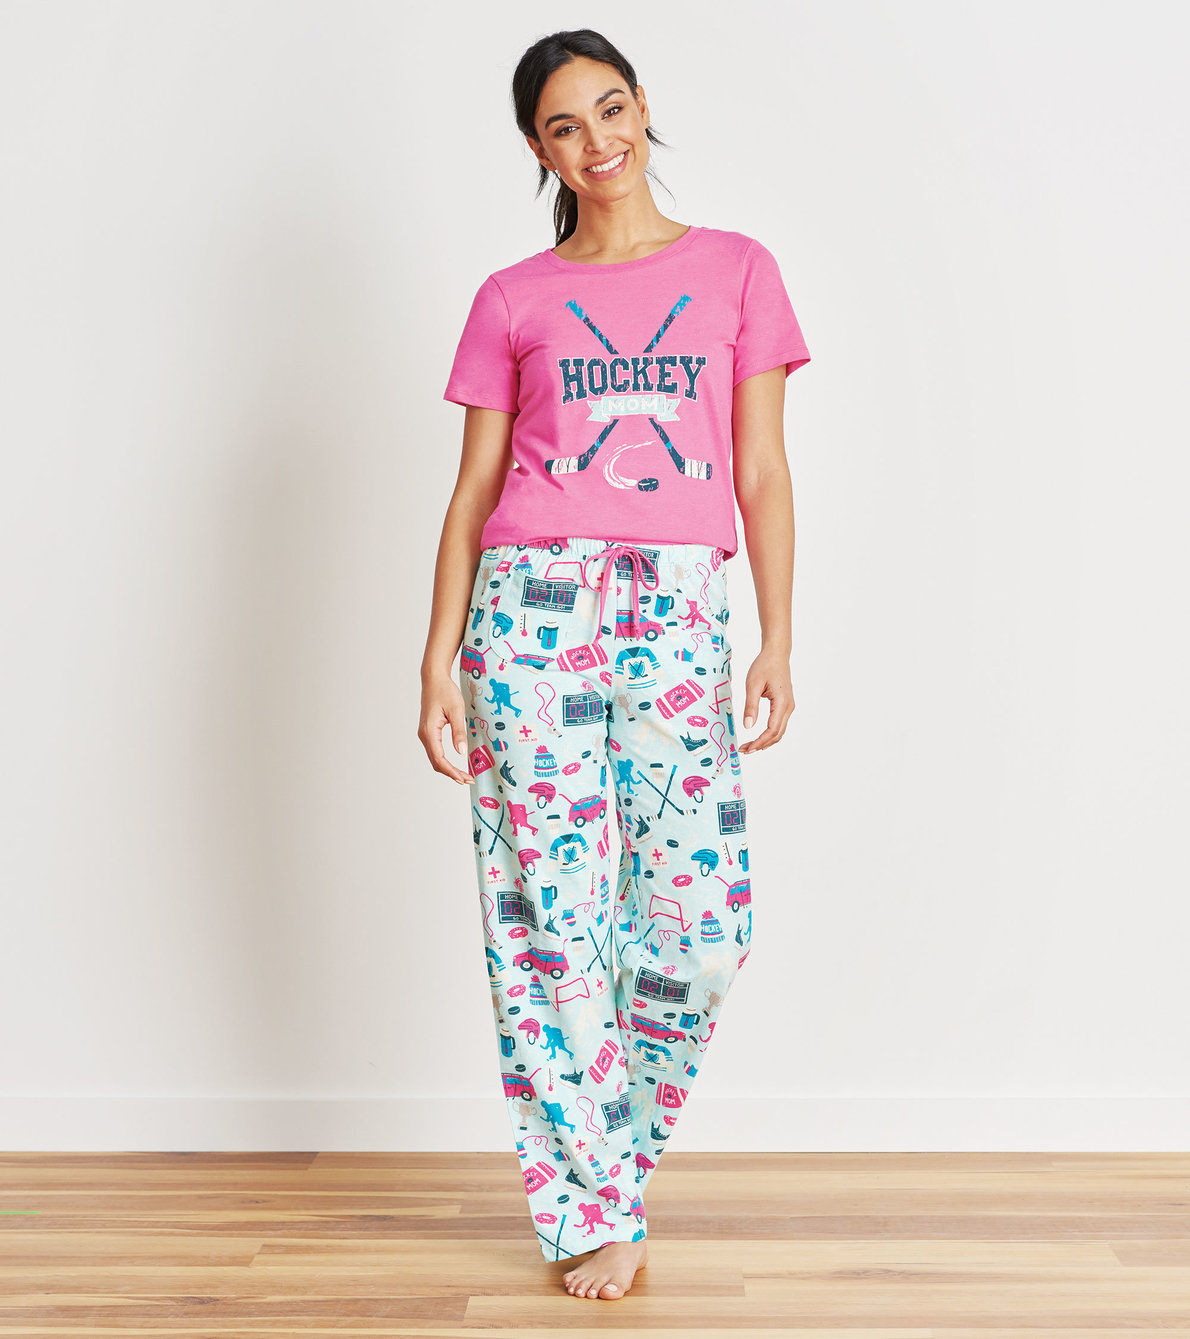 View larger image of Hockey Mom Women's Tee and Pants Pajama Separates